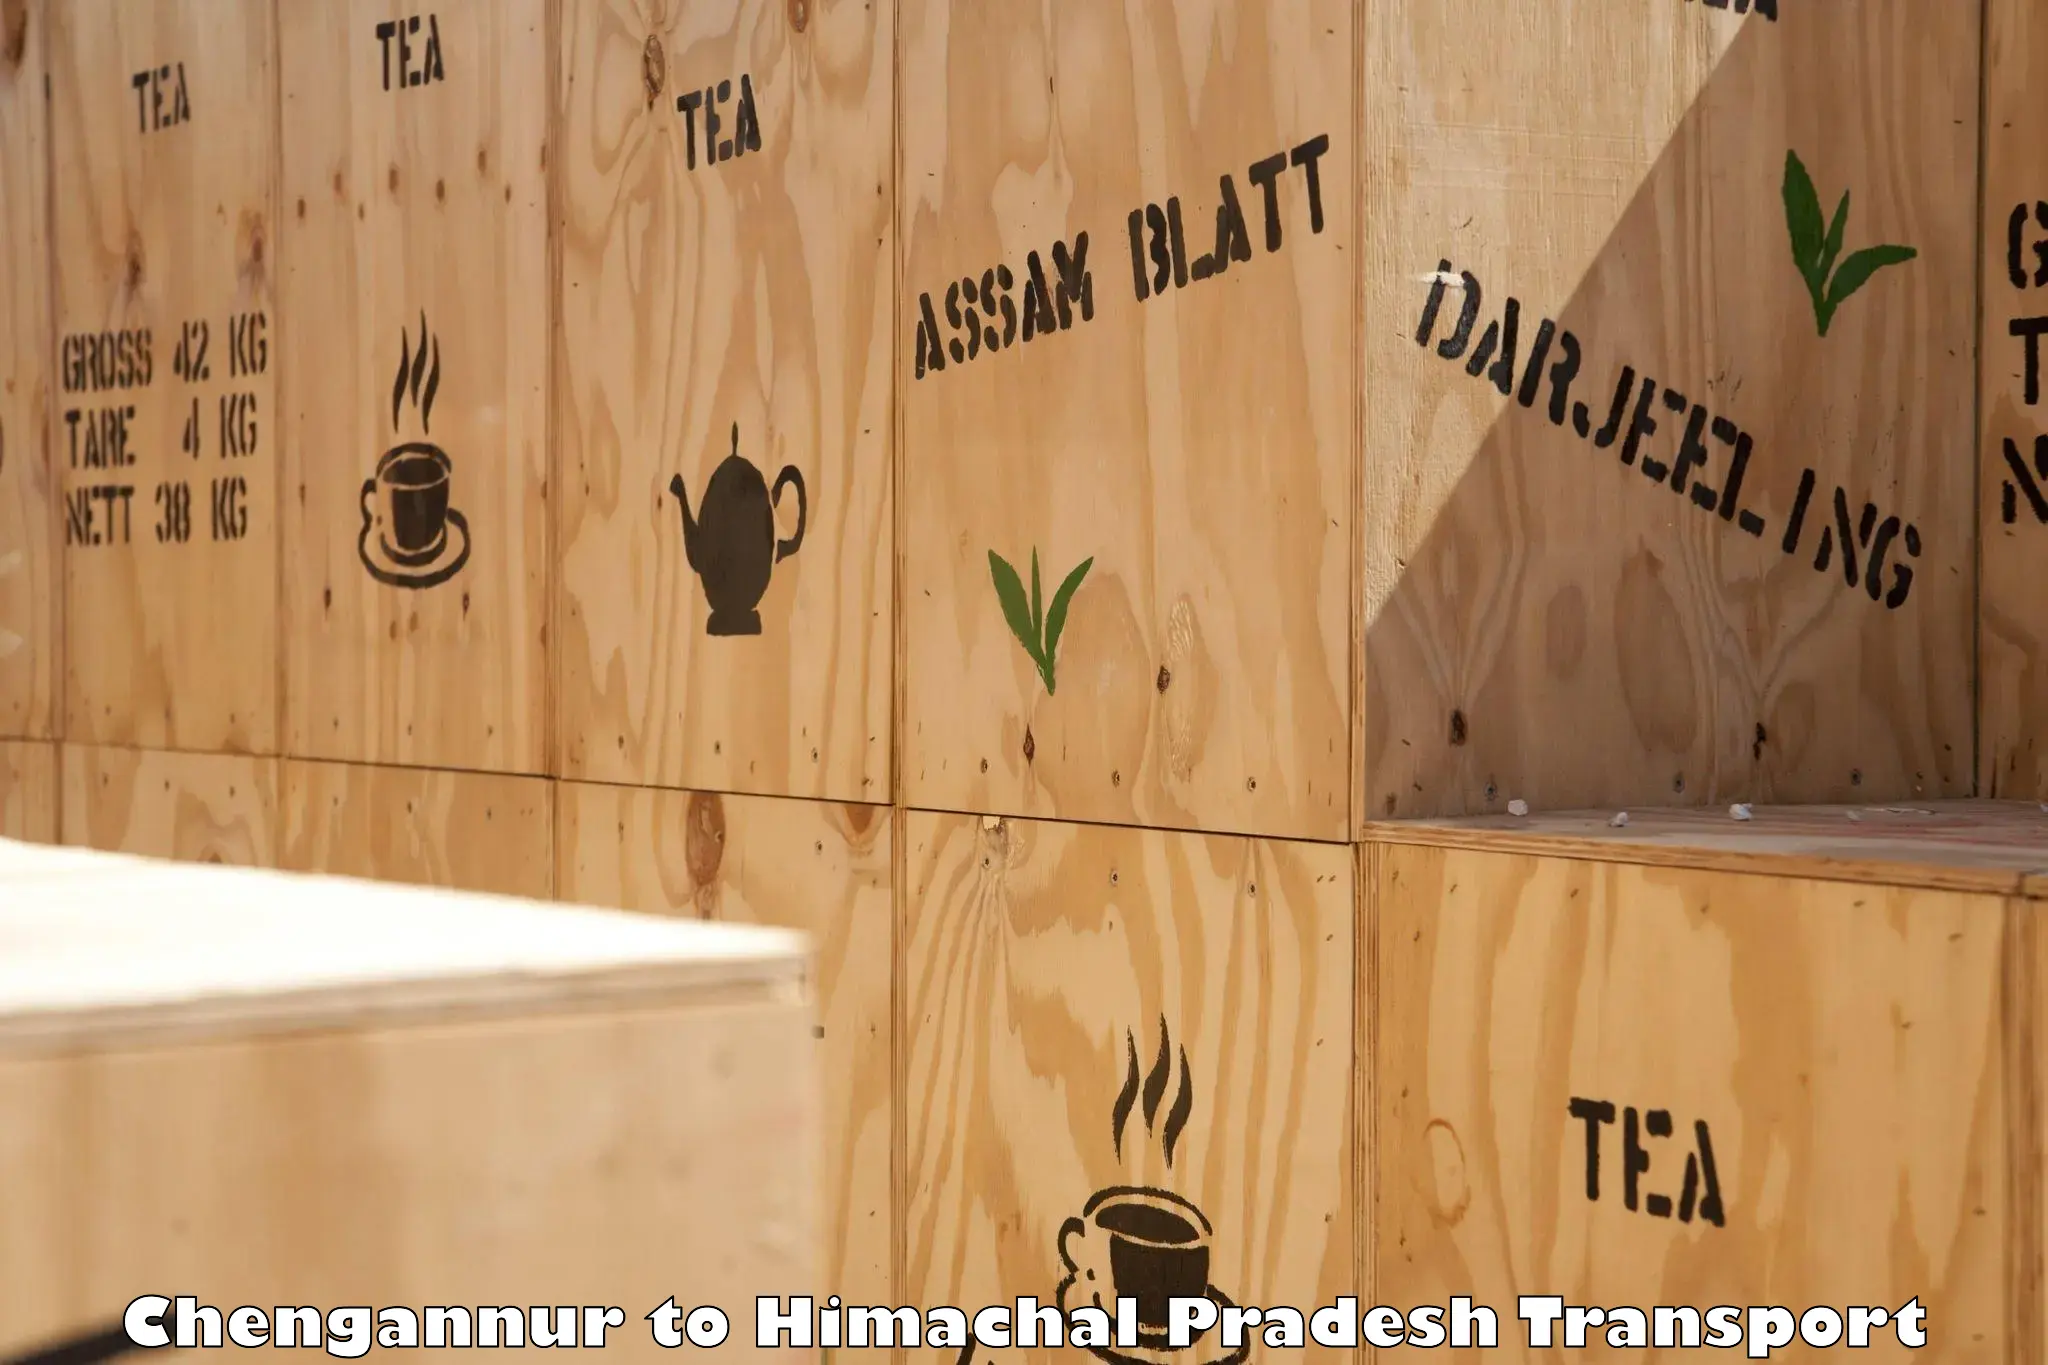 Container transport service Chengannur to Dharampur Kasauli